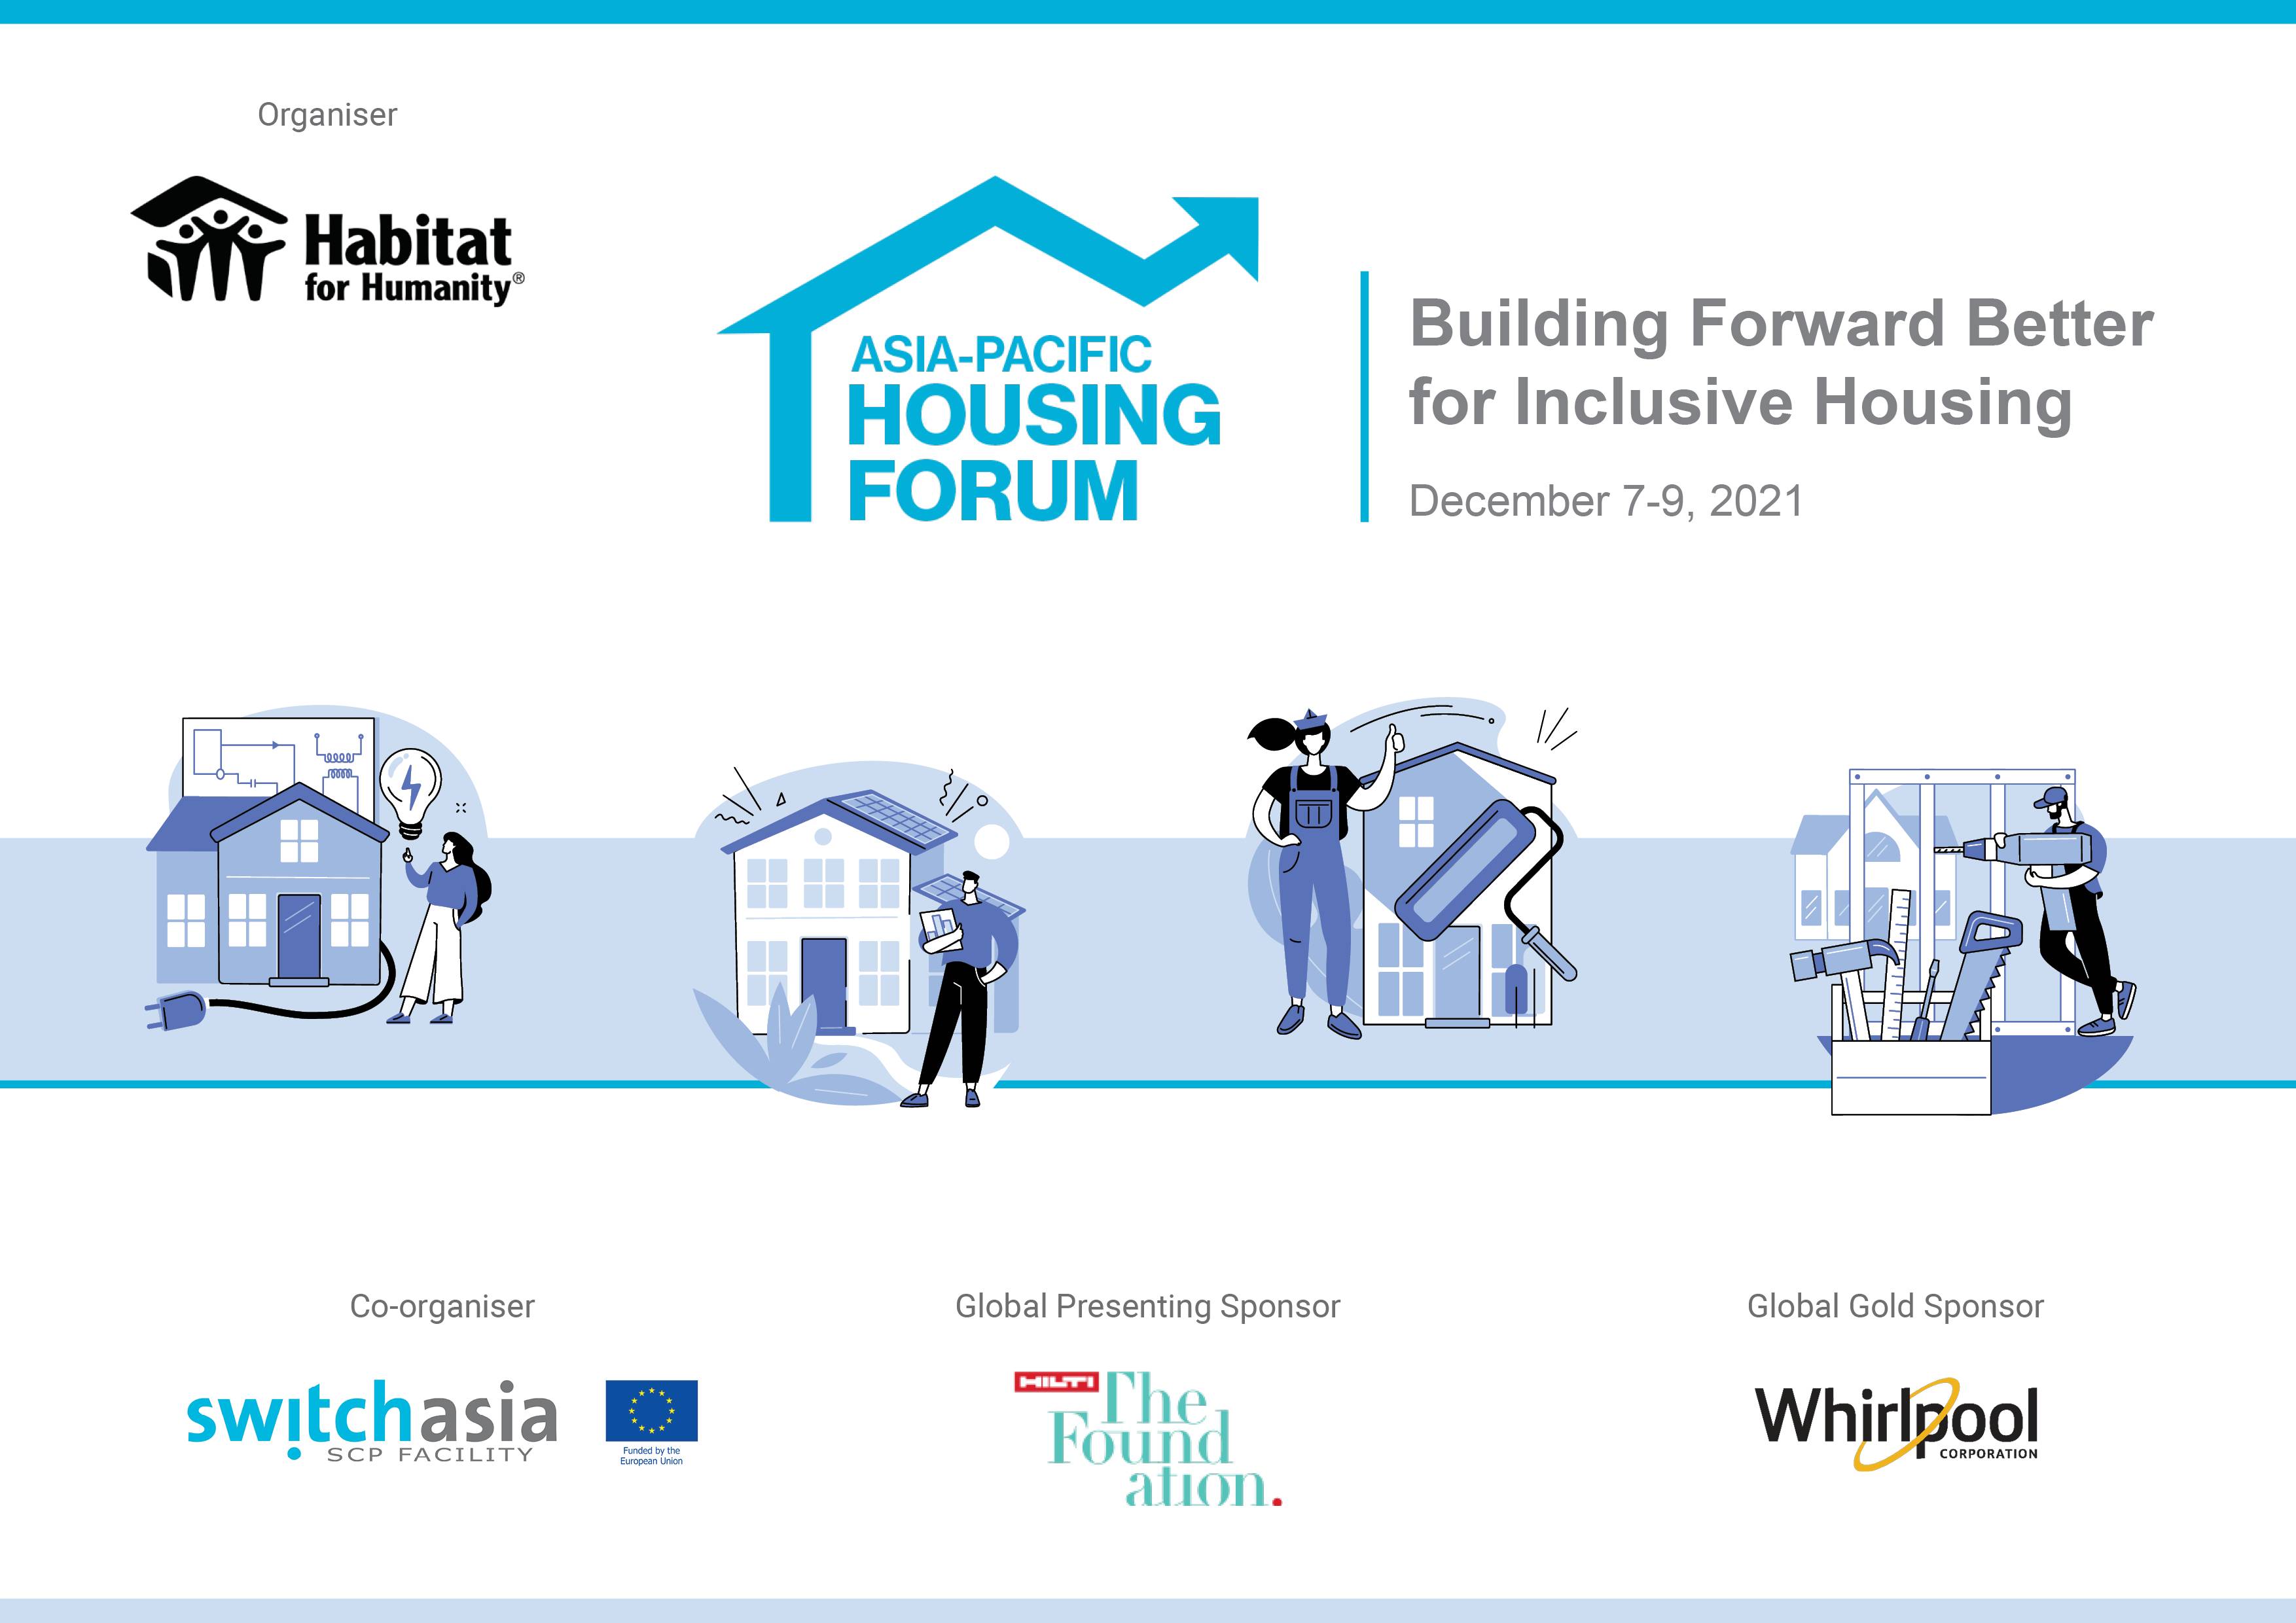 Habitat for Humanity to Hold Asia-Pacific Housing Forum in Thailand for the Third Time